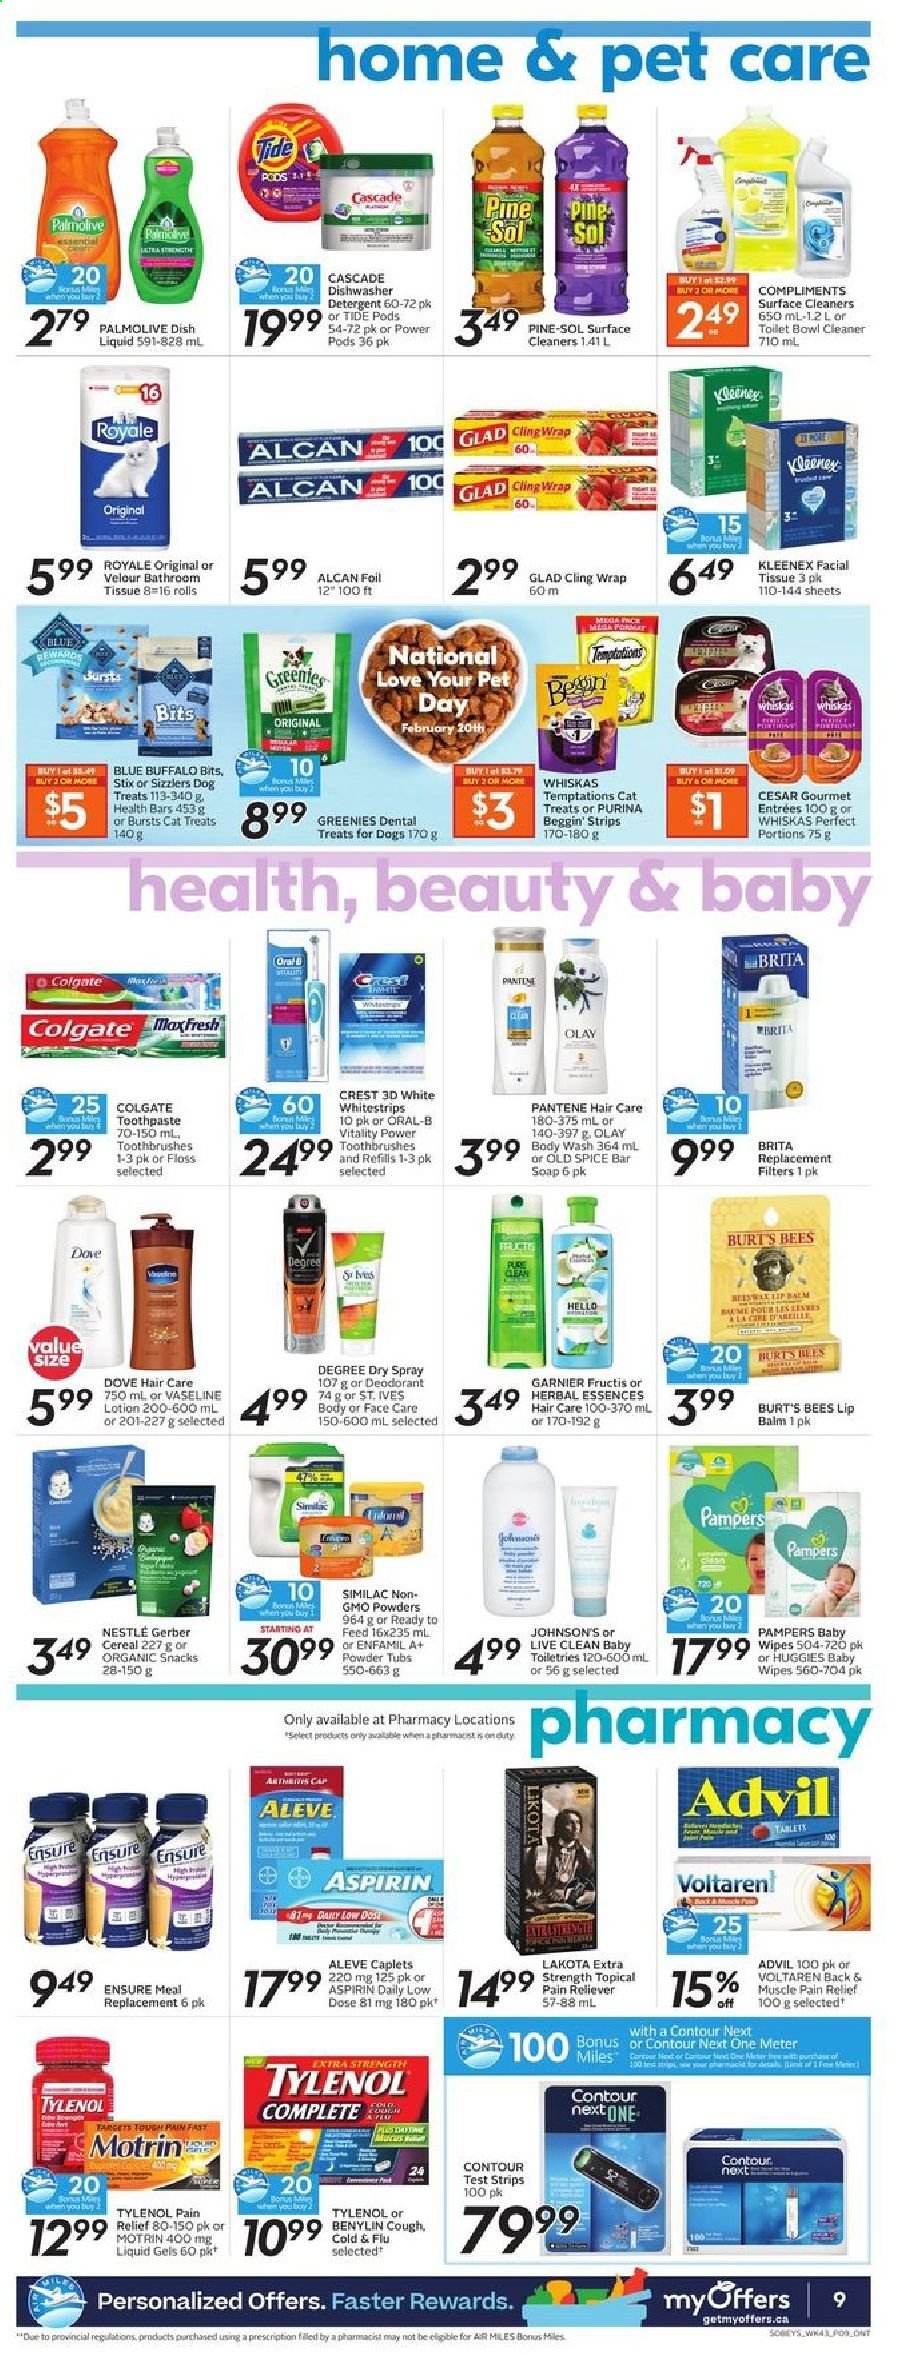 thumbnail - Sobeys Flyer - February 18, 2021 - February 24, 2021 - Sales products - snack, Gerber, cereals, spice, Enfamil, Similac, wipes, baby wipes, Johnson's, Kleenex, tissues, cleaner, Pine-Sol, Tide, Cascade, body wash, Palmolive, Vaseline, soap bar, soap, toothpaste, Crest, lip balm, Olay, Herbal Essences, Fructis, body lotion, anti-perspirant, contour, Greenies, Blue Buffalo, dental treats, Purina, Beggin', pain relief, Aleve, Cold & Flu, Tylenol, Advil Rapid, Low Dose, aspirin, Benylin, Motrin, Nestlé, Garnier, Huggies, Pampers, Pantene, Old Spice, Oral-B, deodorant. Page 10.